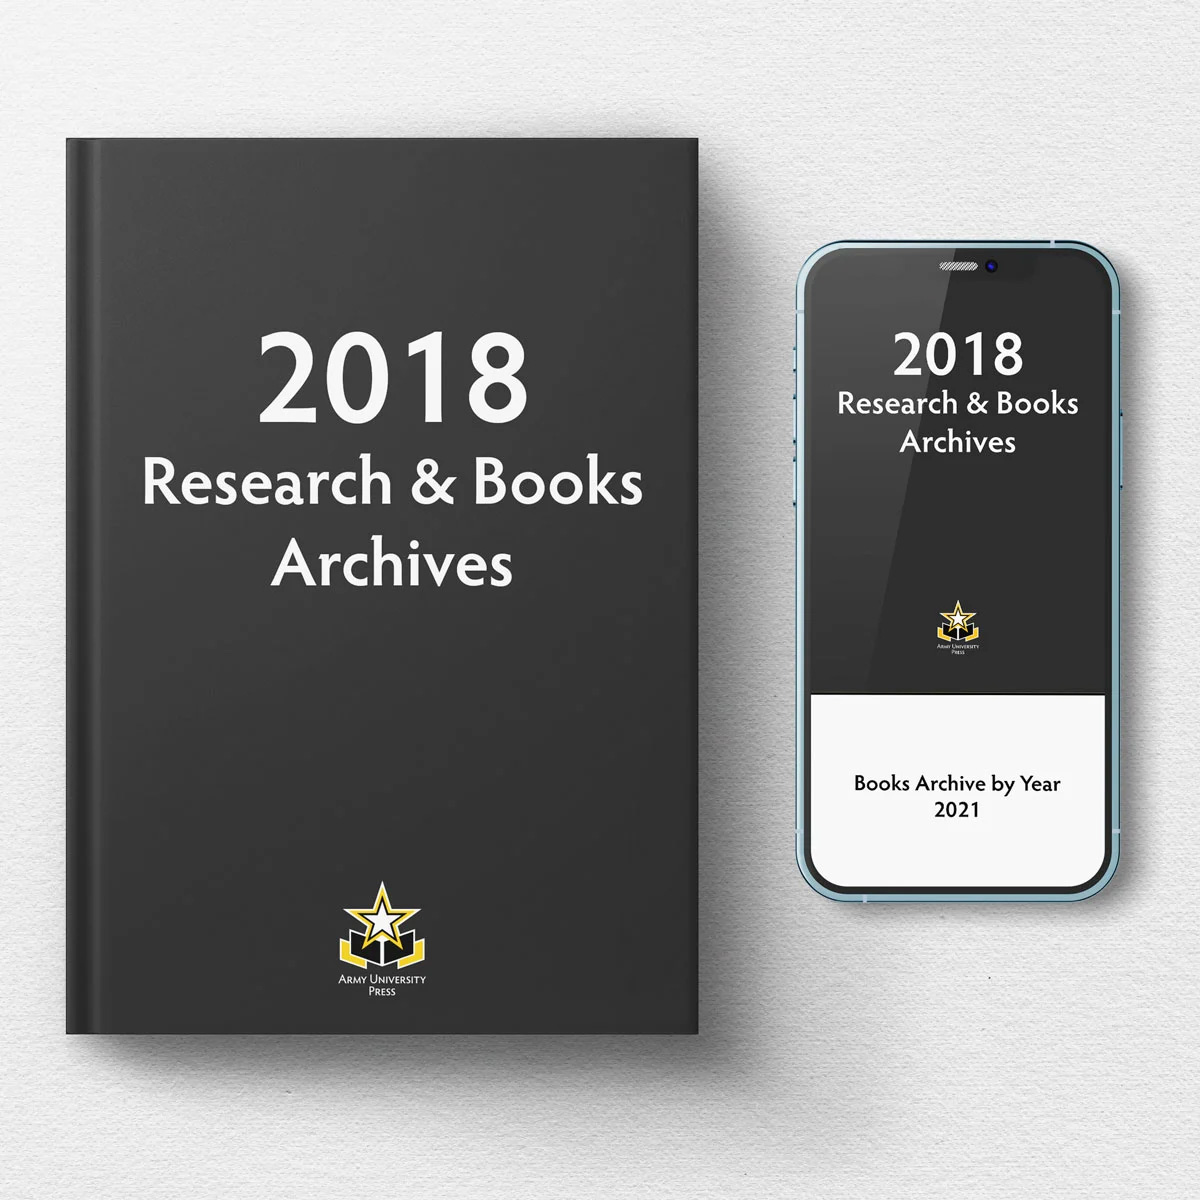 2018 Archives